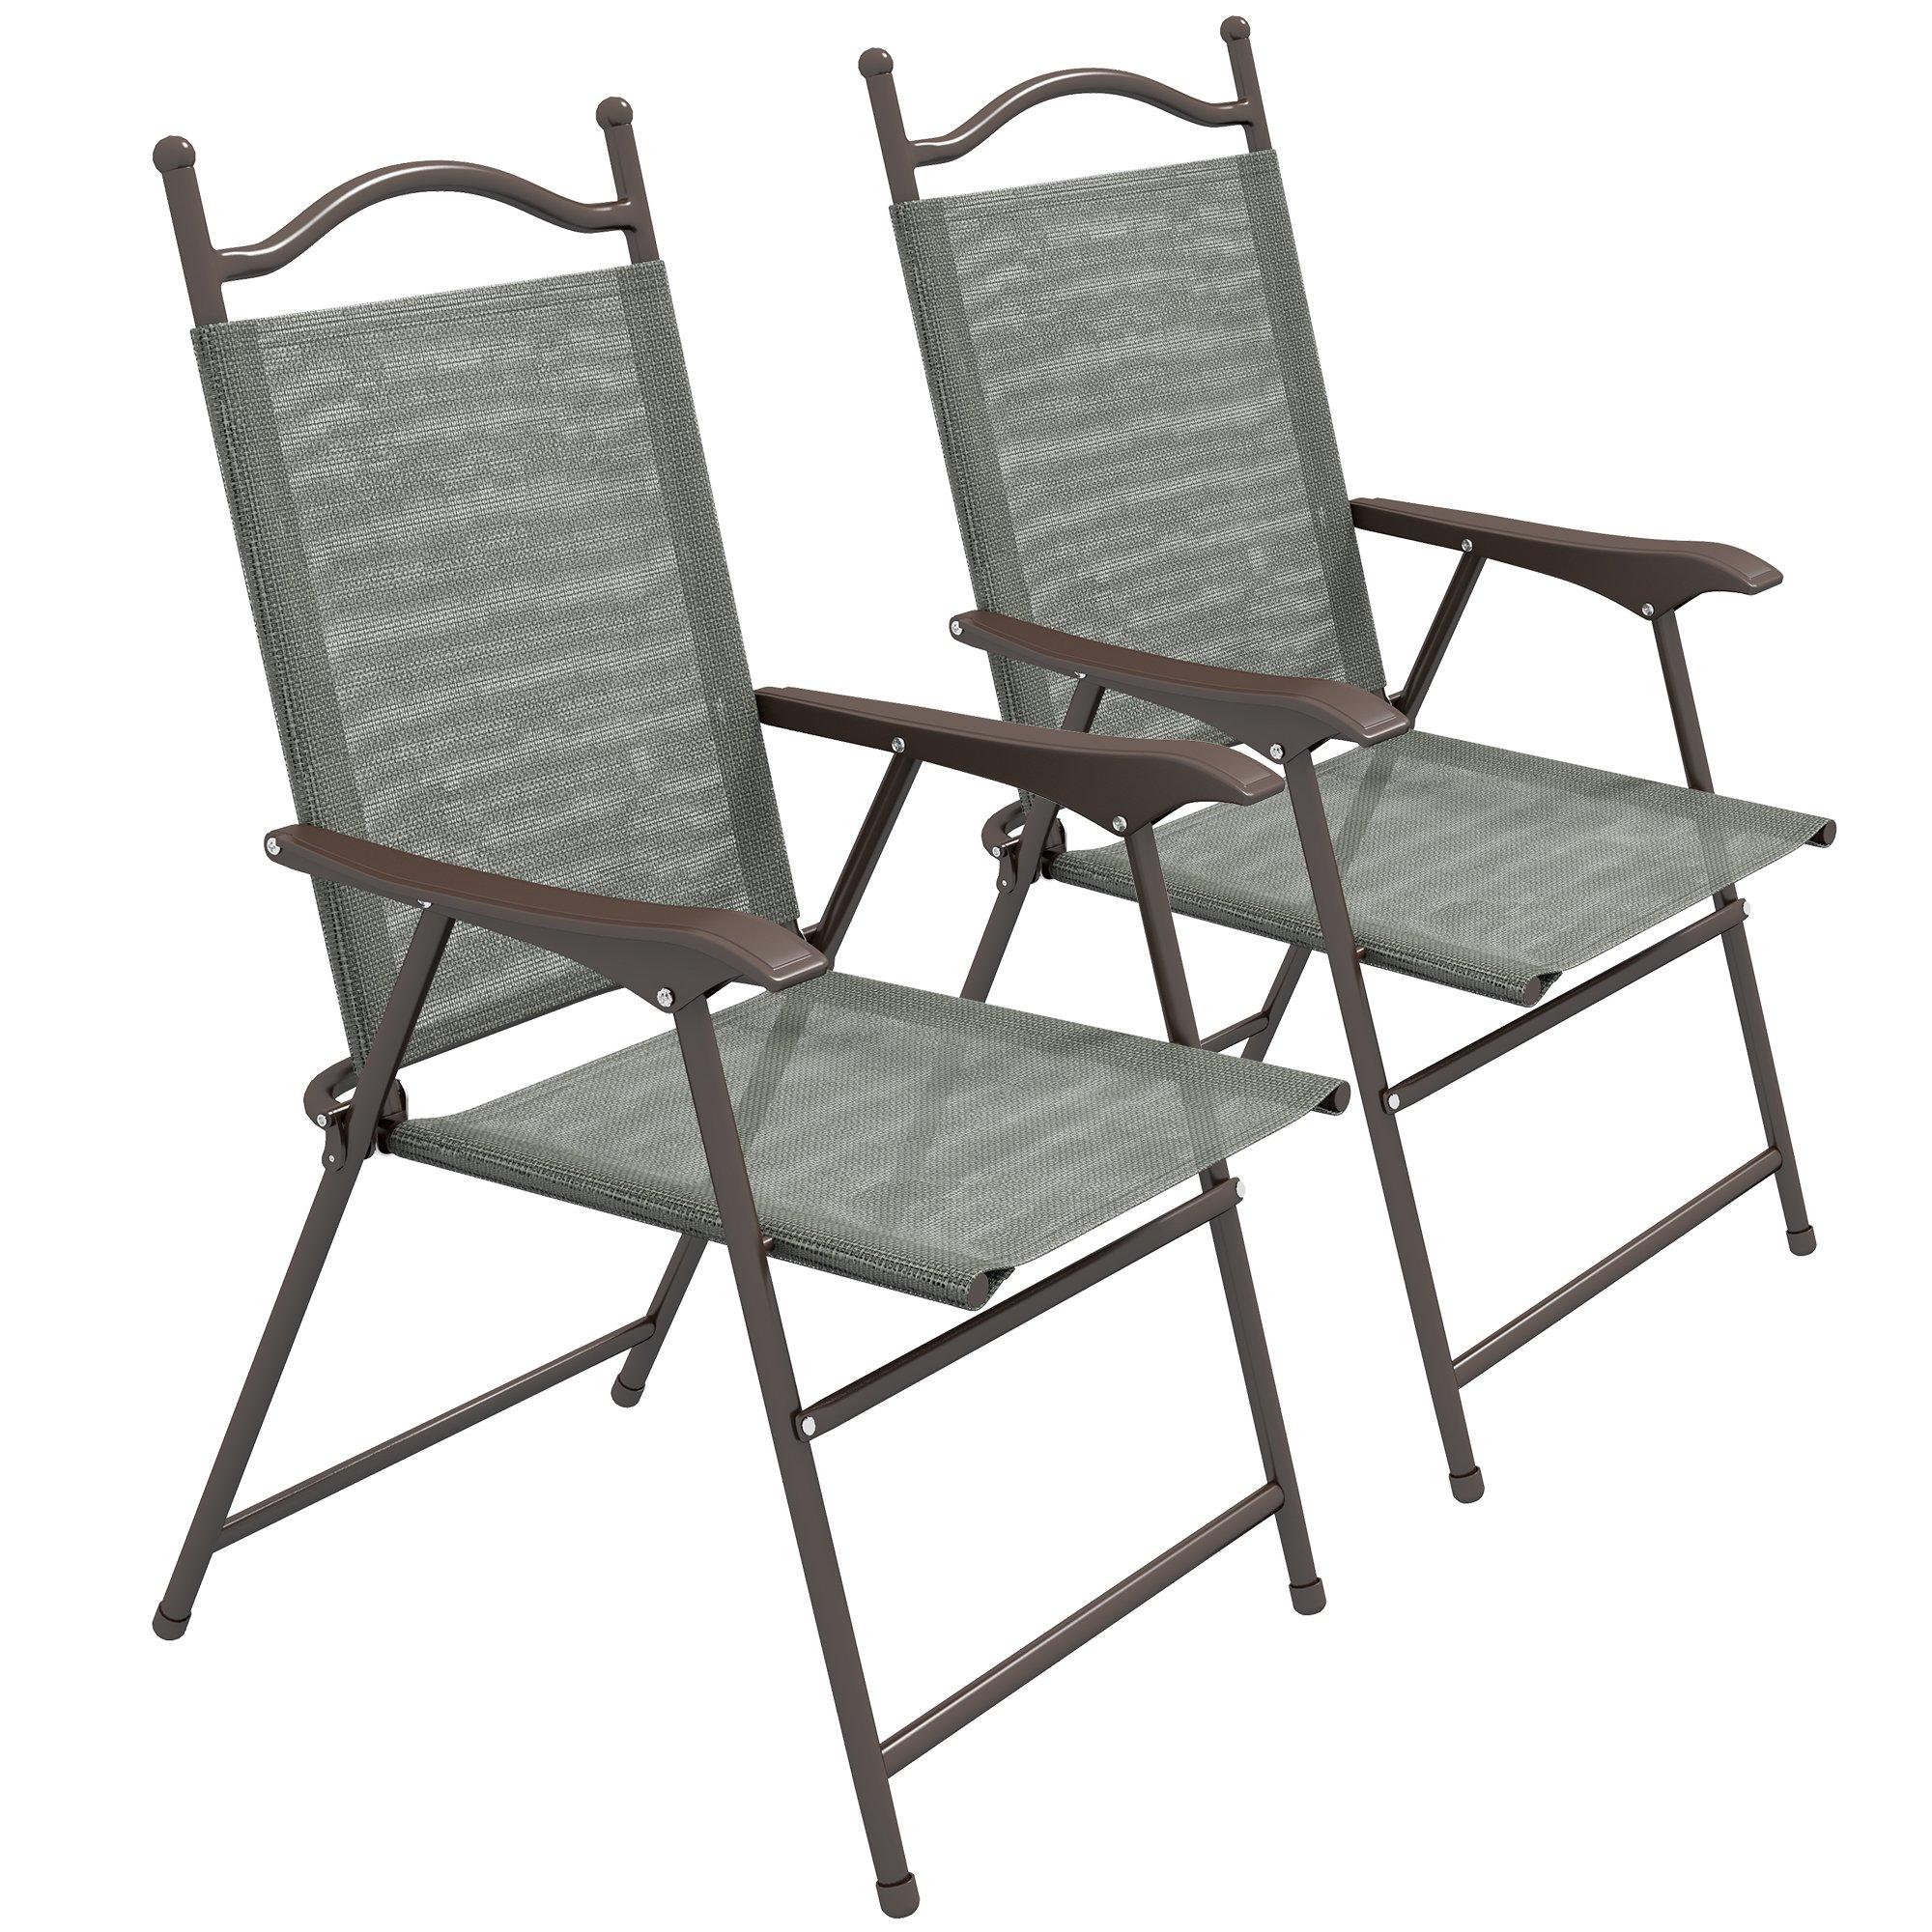 Patio Garden Chairs with Foldable Design, Sports Chairs